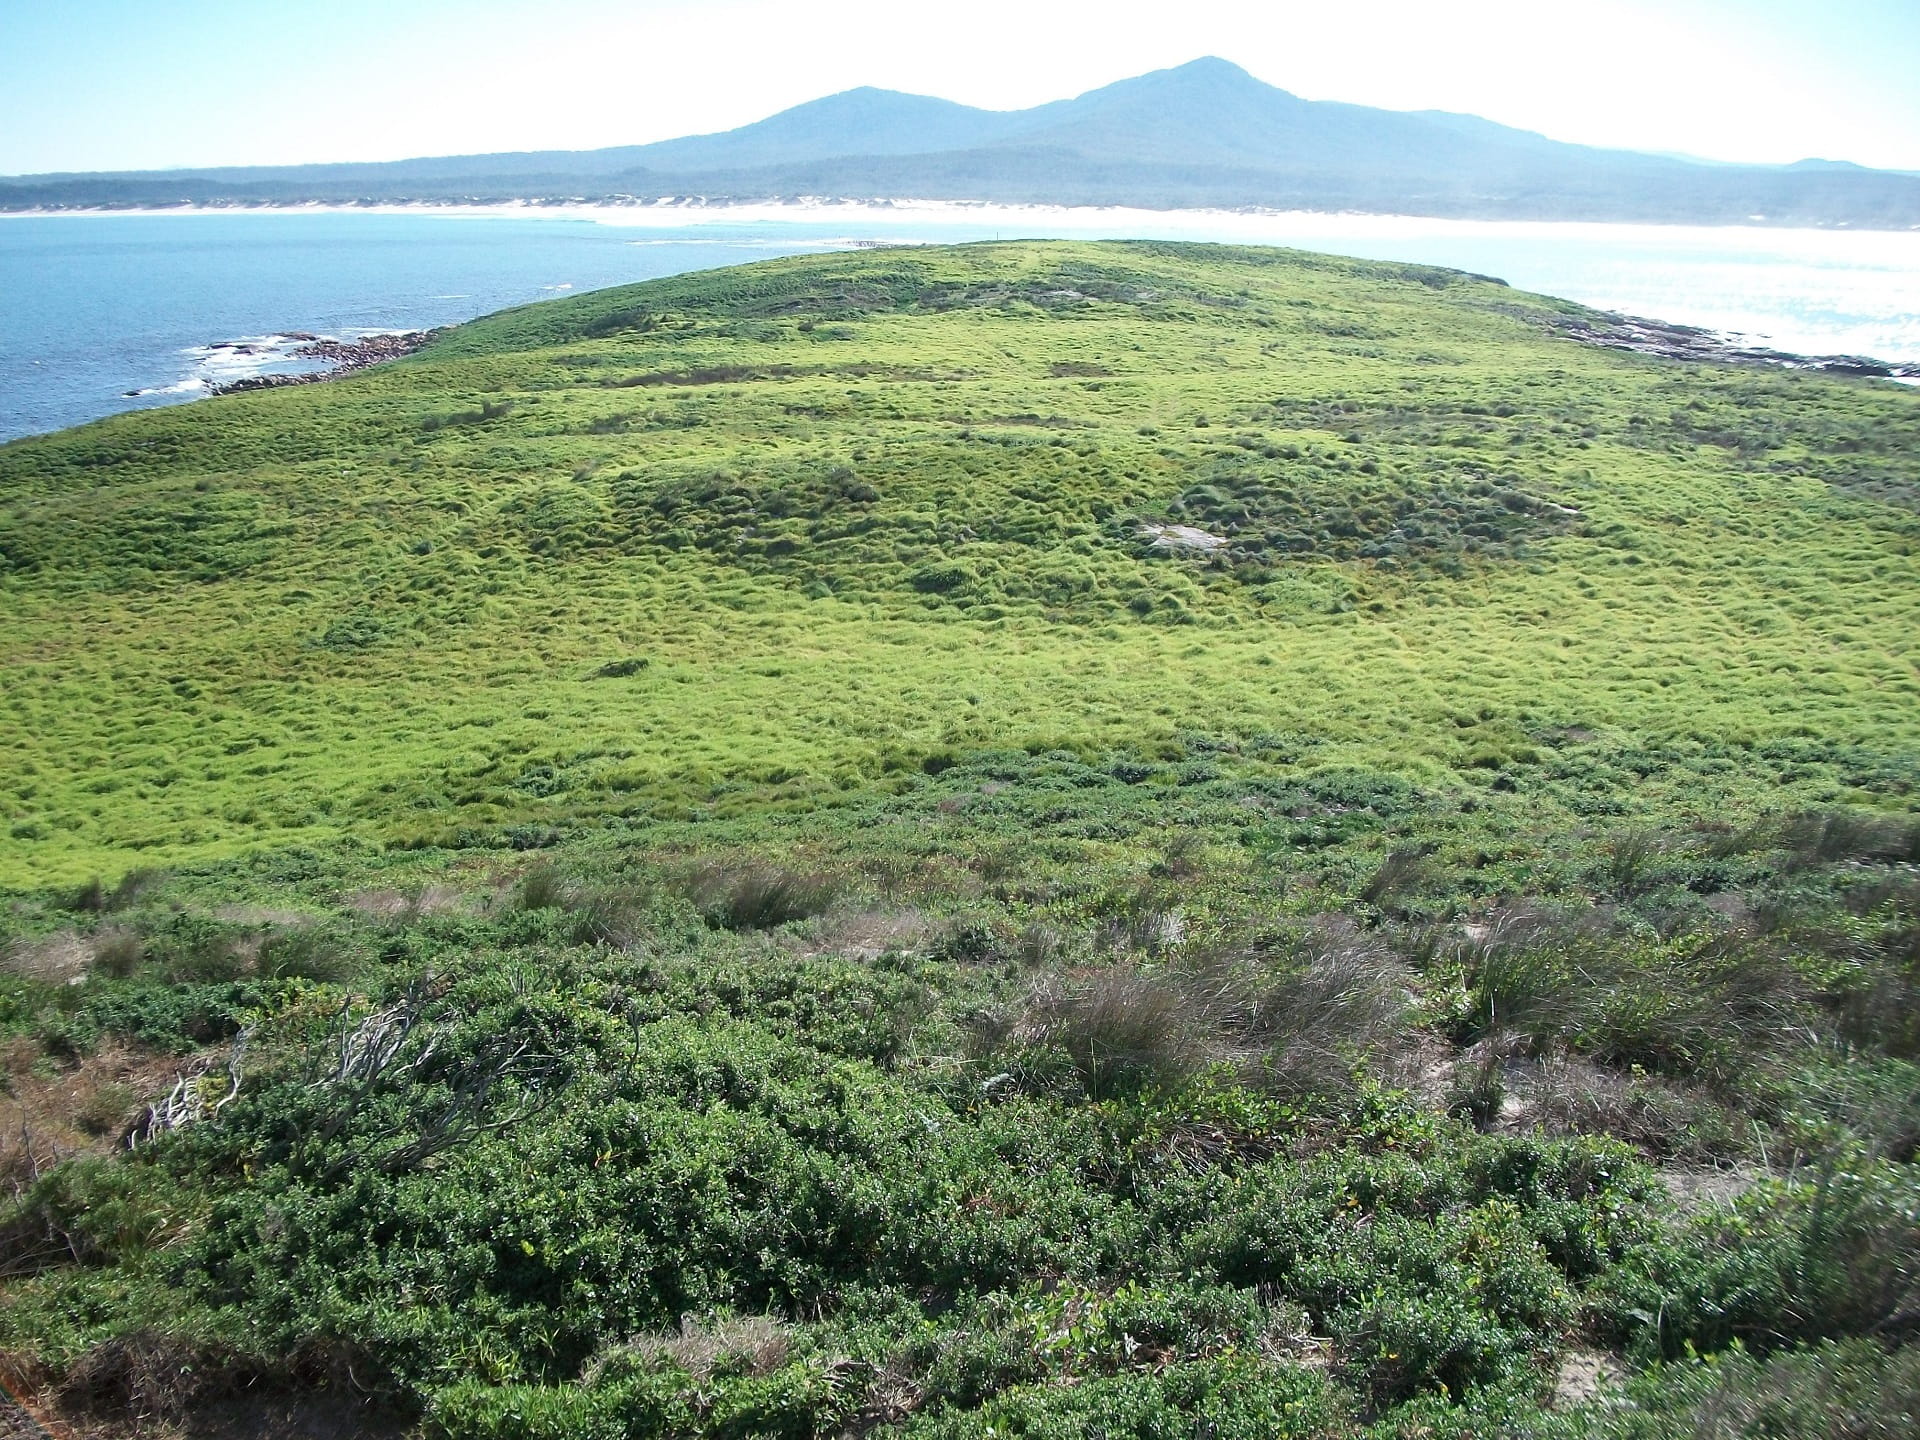 A view of the vegetation across beautiful Gabo Island Lighthouse Reserve